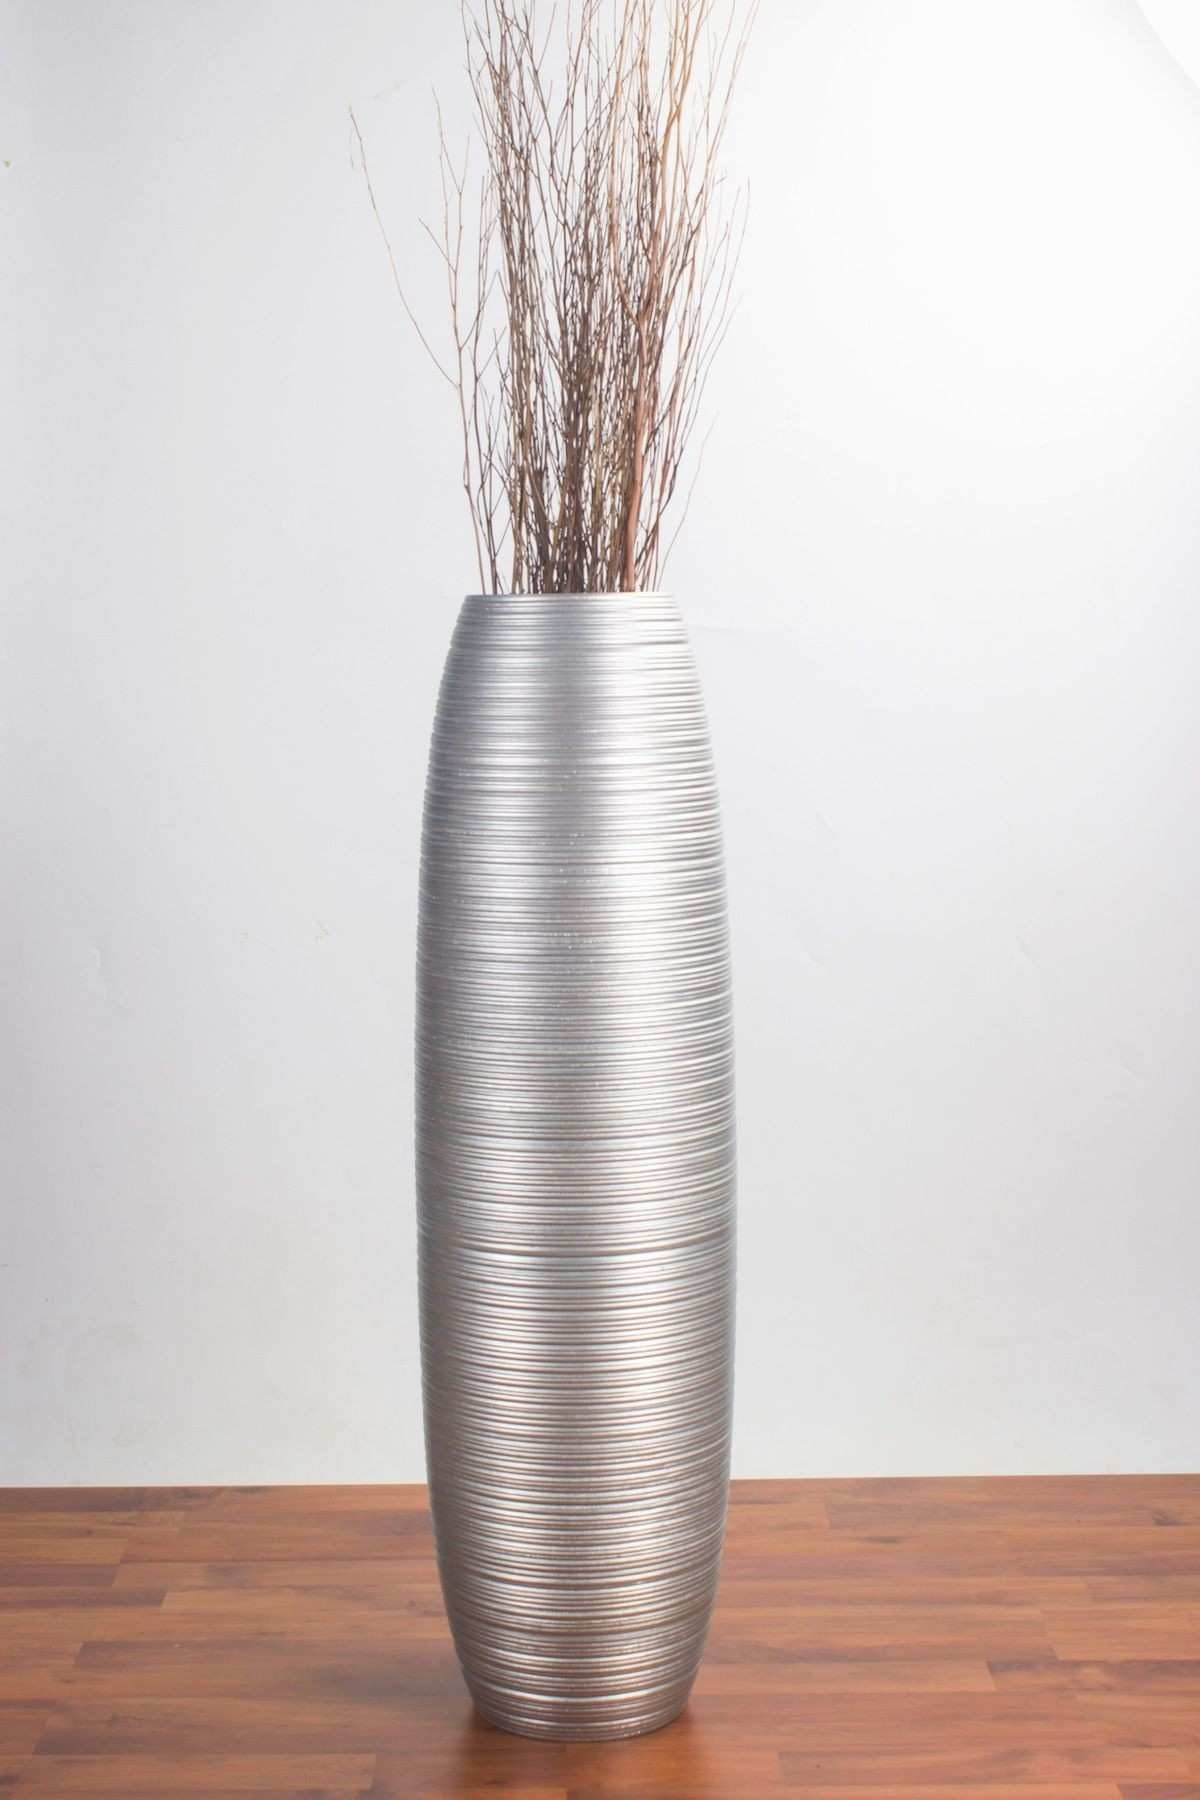 10 Perfect 18 Inch Vases In Bulk 2024 free download 18 inch vases in bulk of silver vases wholesale pandoraocharms us in silver vases wholesale glass uk impressive tall floor vase 36 inches wood